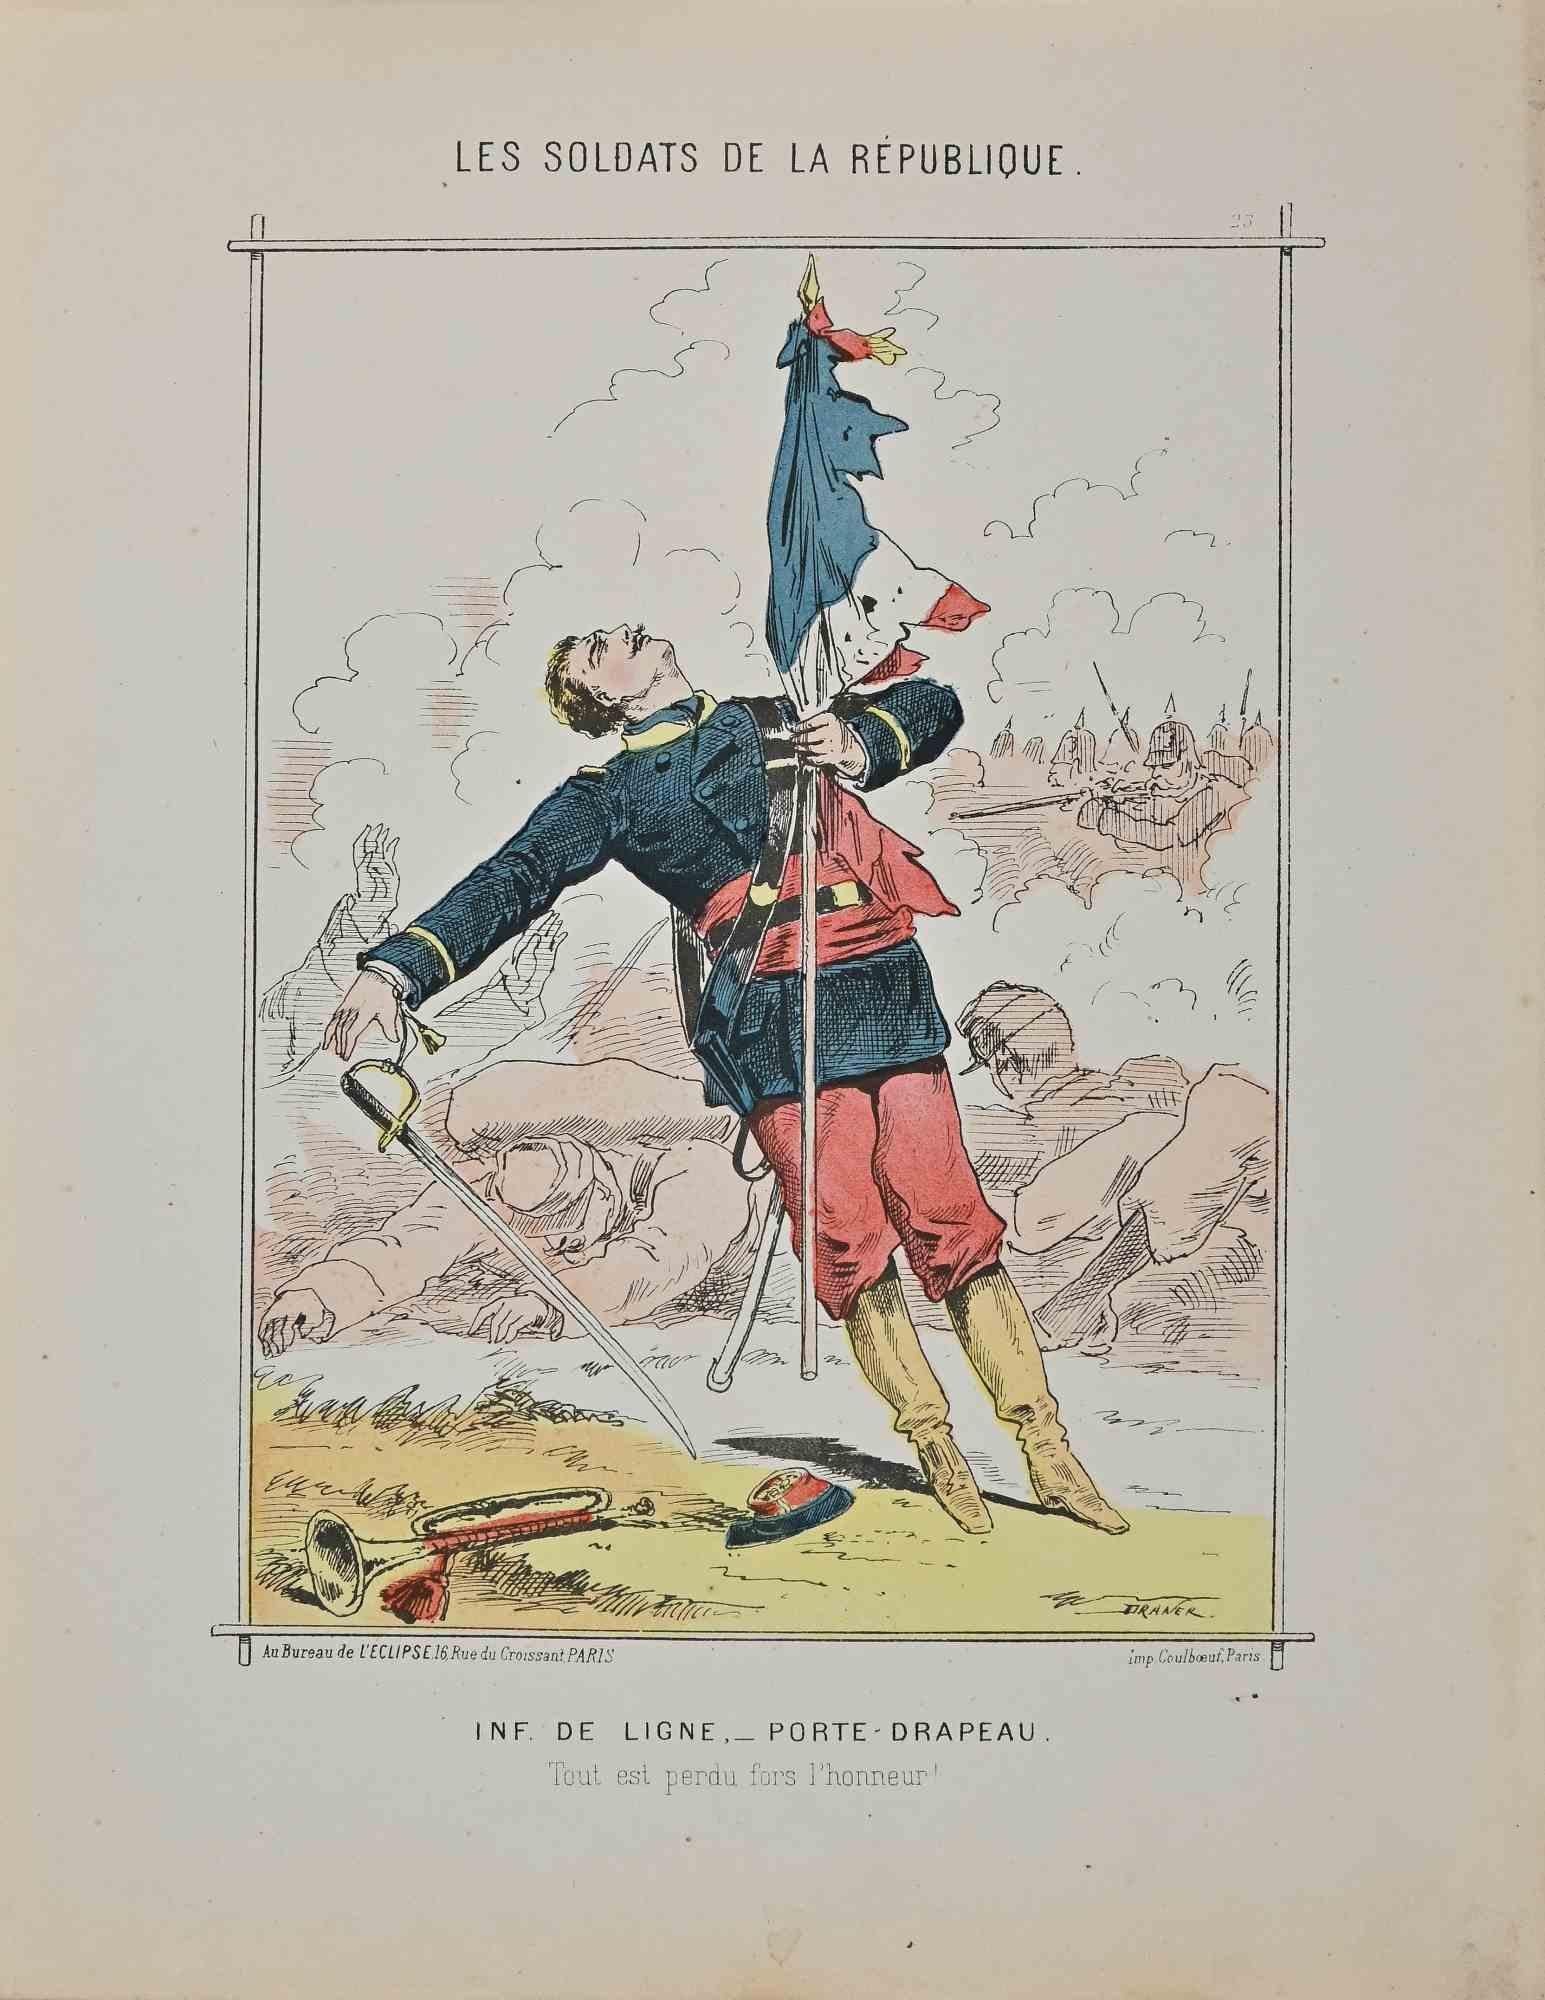 Flag-Holder is an original lithograph realized by Jules Renard in 19th Century.

It is part of the collection "Soldiers of the Republic".

Good condition.

Draner, actually Jules Joseph Georges Renard (12 November 1833 in Liège – 1926 in Paris), was